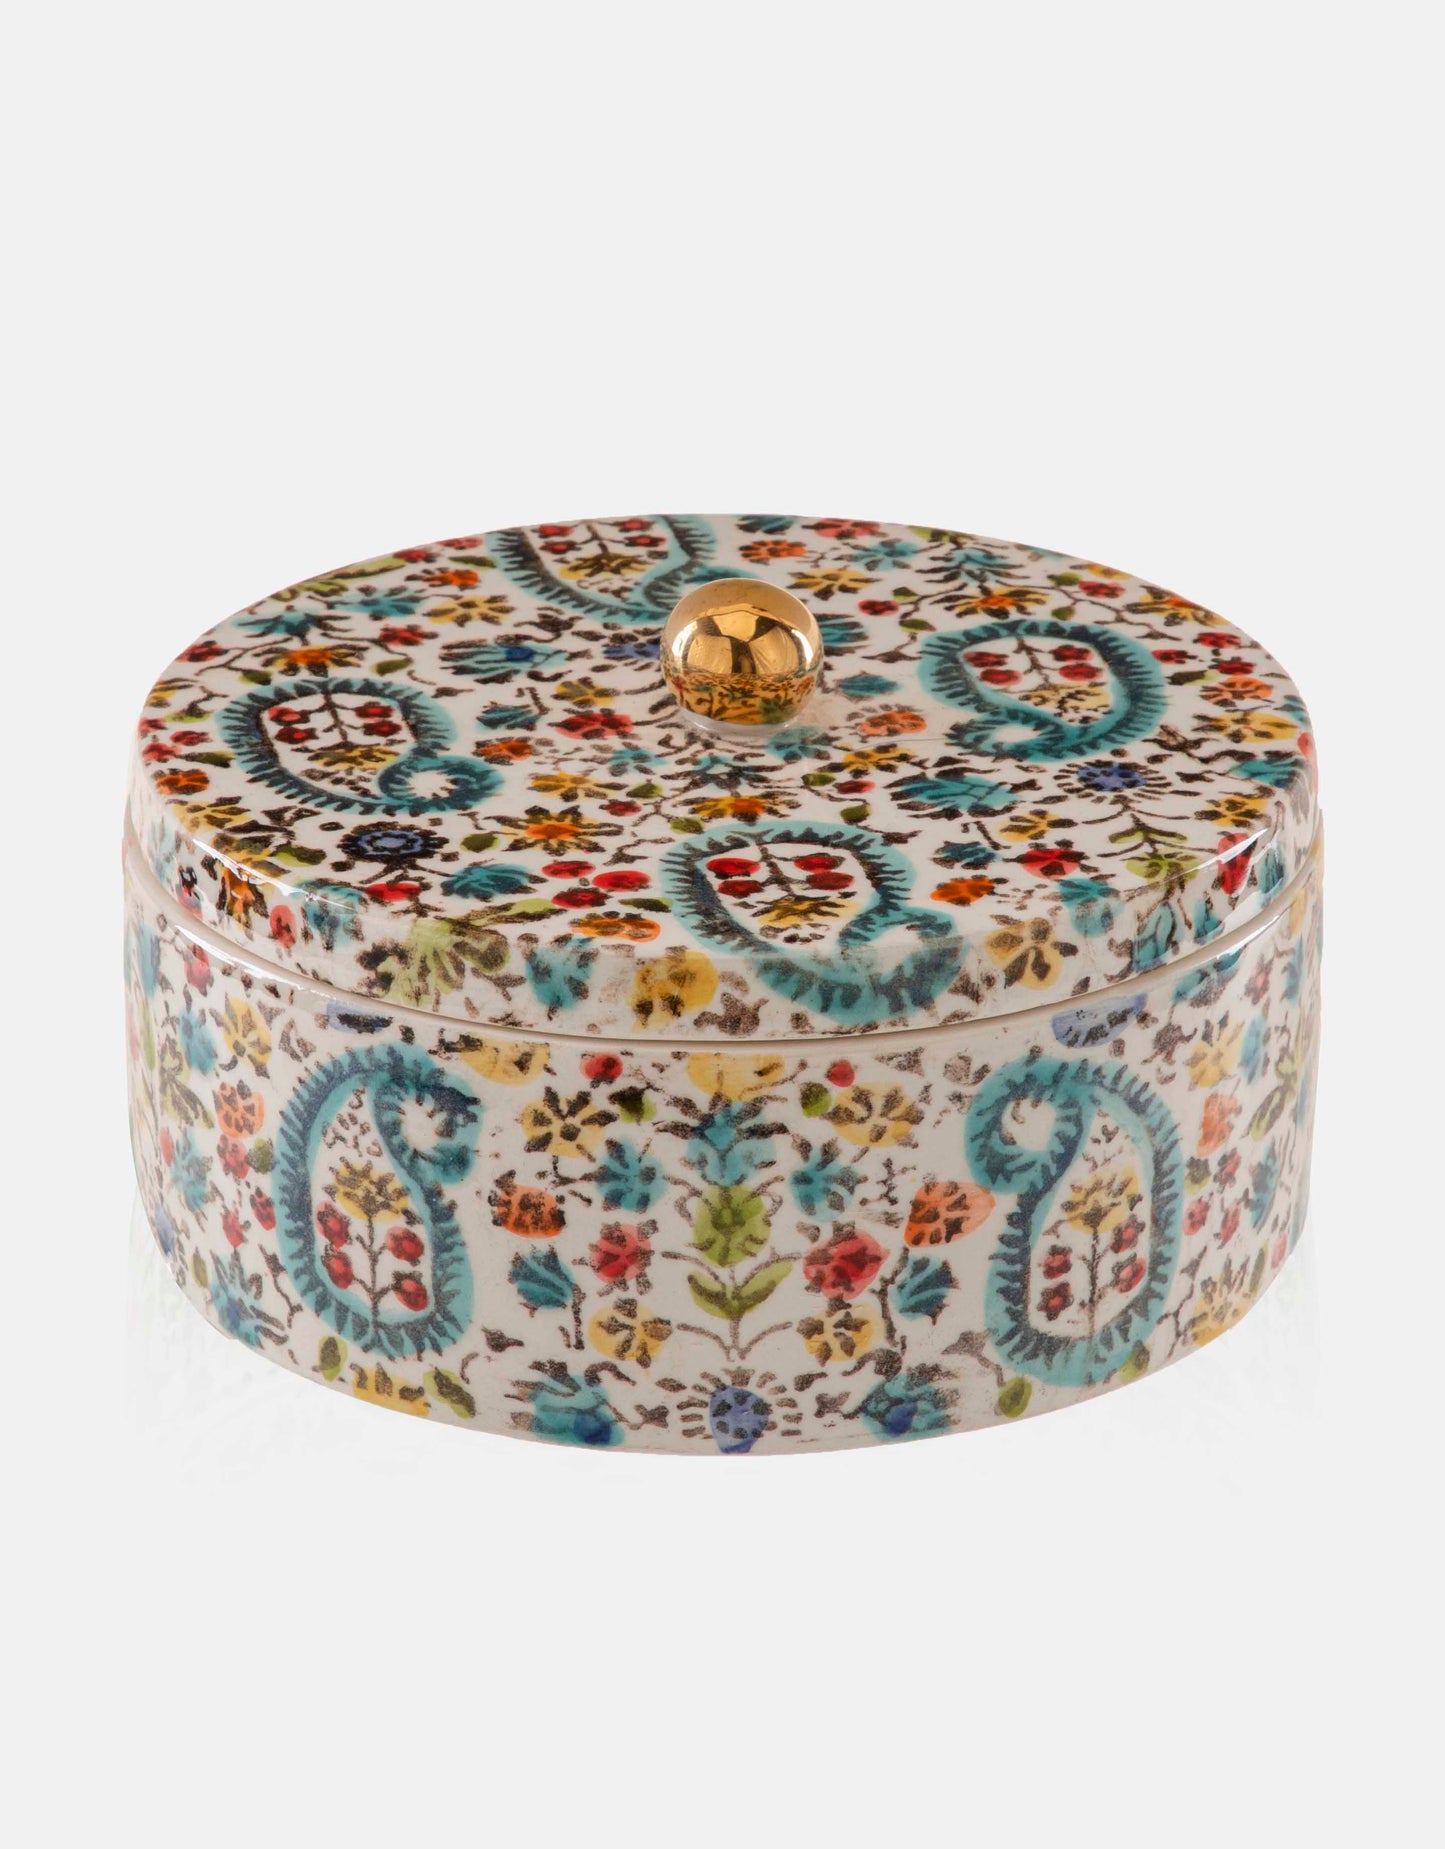 Round Ceramic Candy or Nut Box